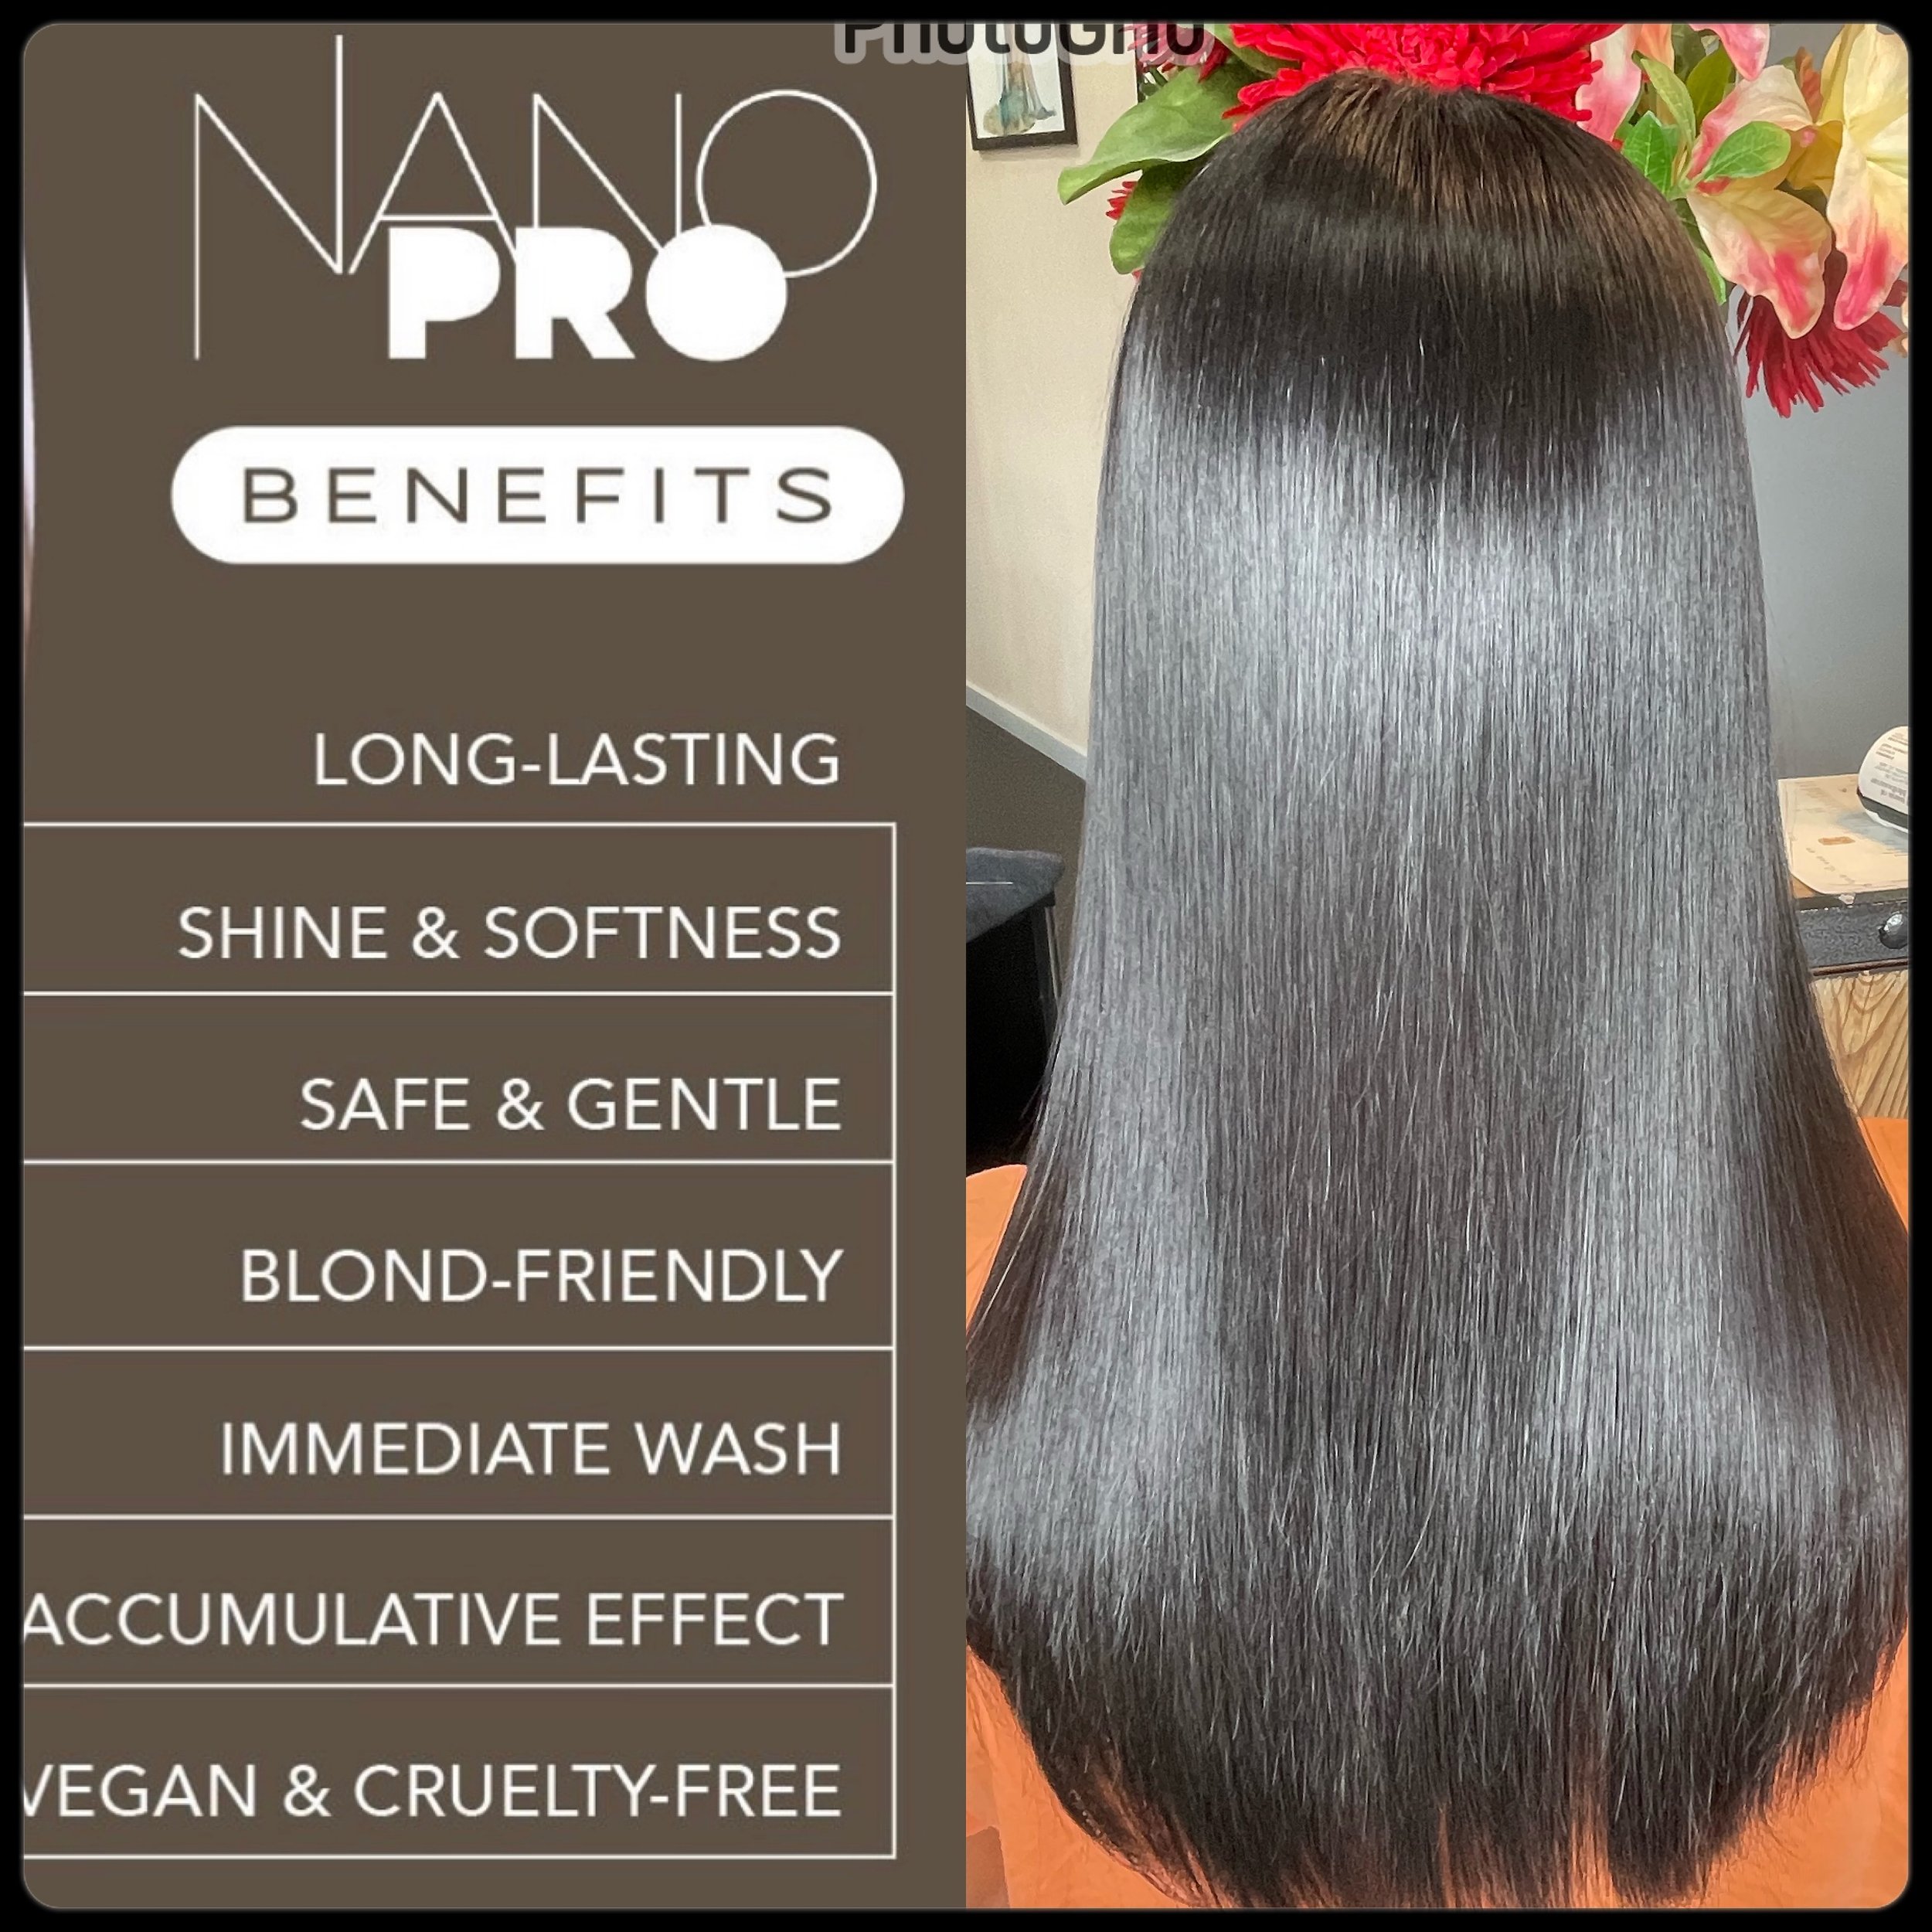 Unleash the power of nano technology and elevate your hair game with nano pro.say hello to smother,straighter shine and healthy hair. Get ready to make heads turn with nano pro by your  sideNano Pro *Nanoplasty Benefits: The Ultimate Choice for Your 